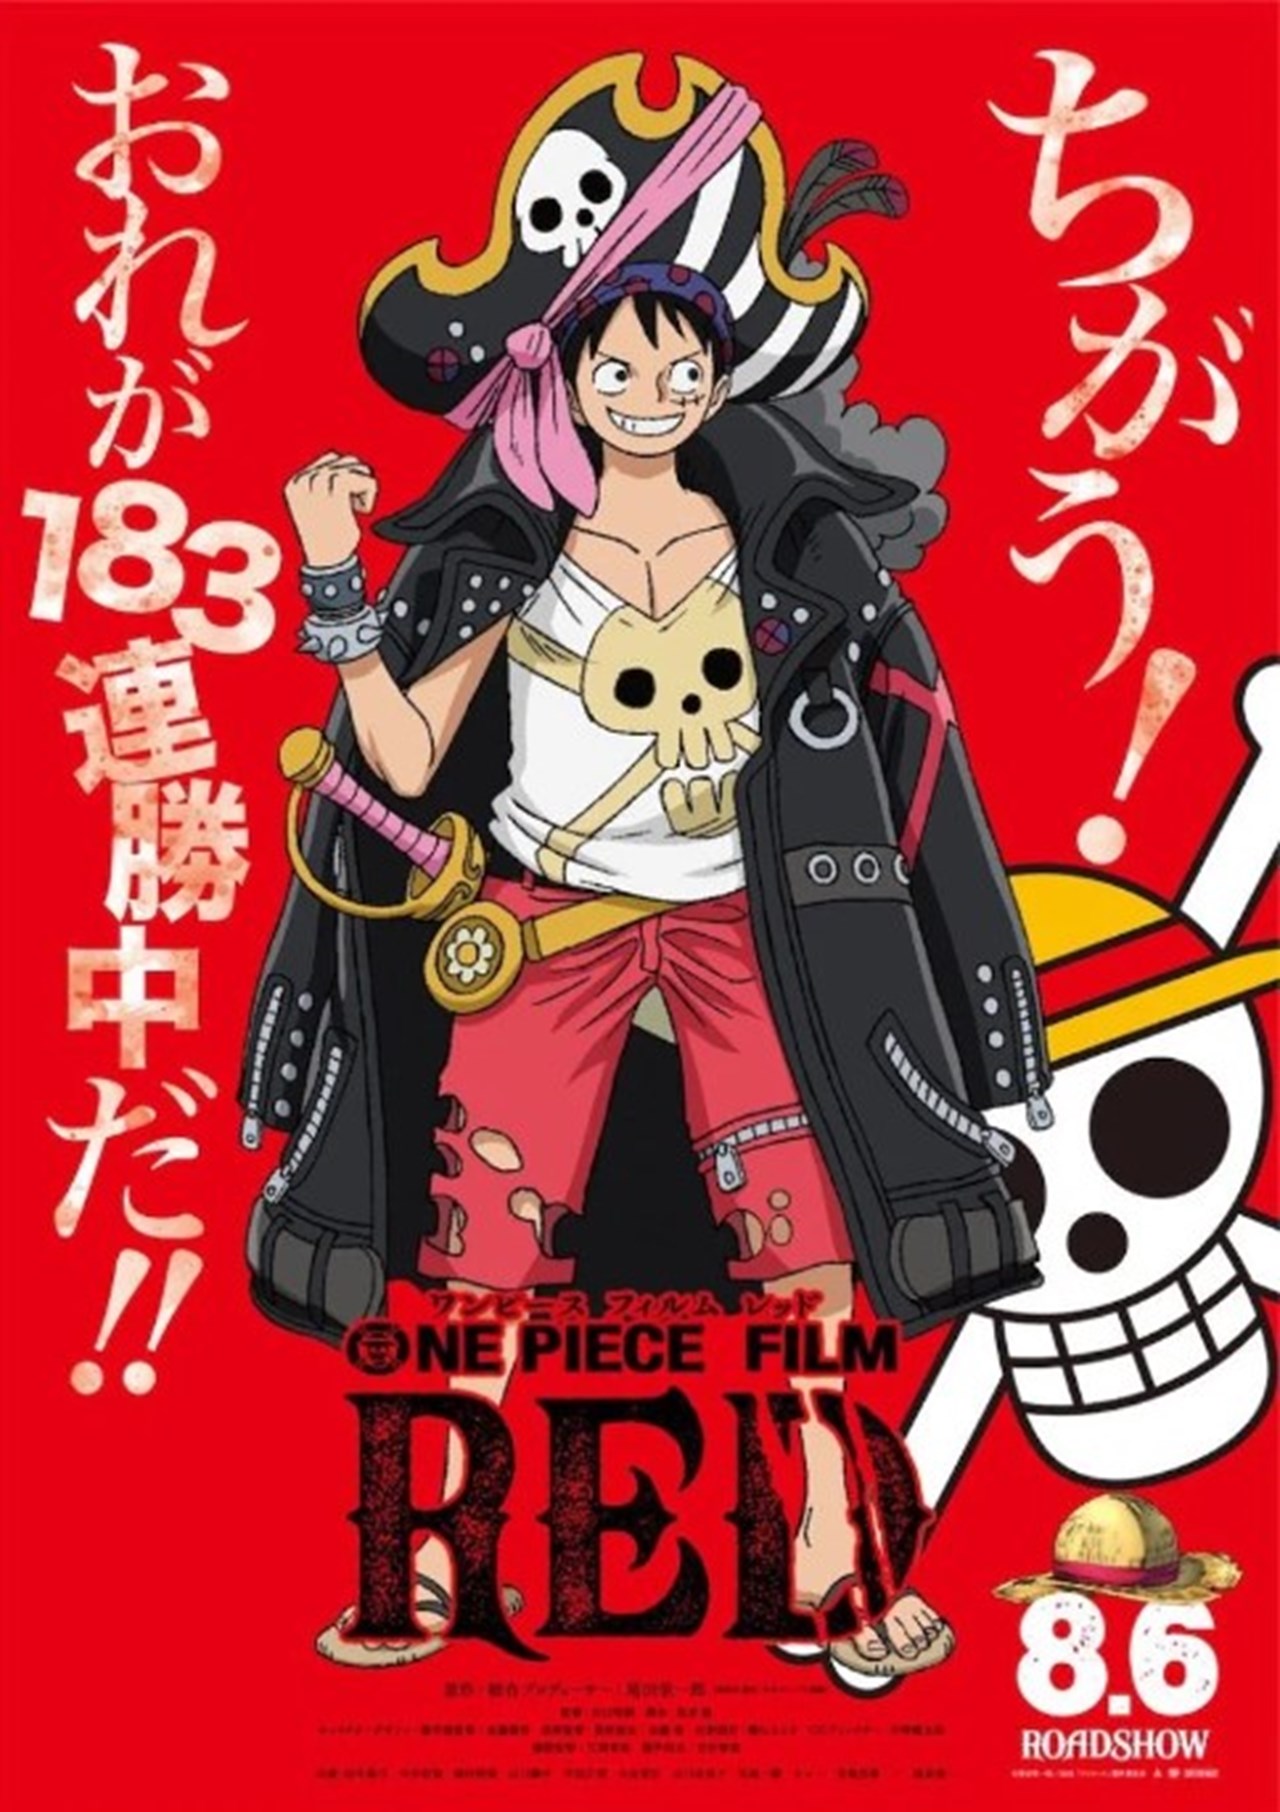 The One Piece Remake Anime Announced from WIT Studio - Crunchyroll News